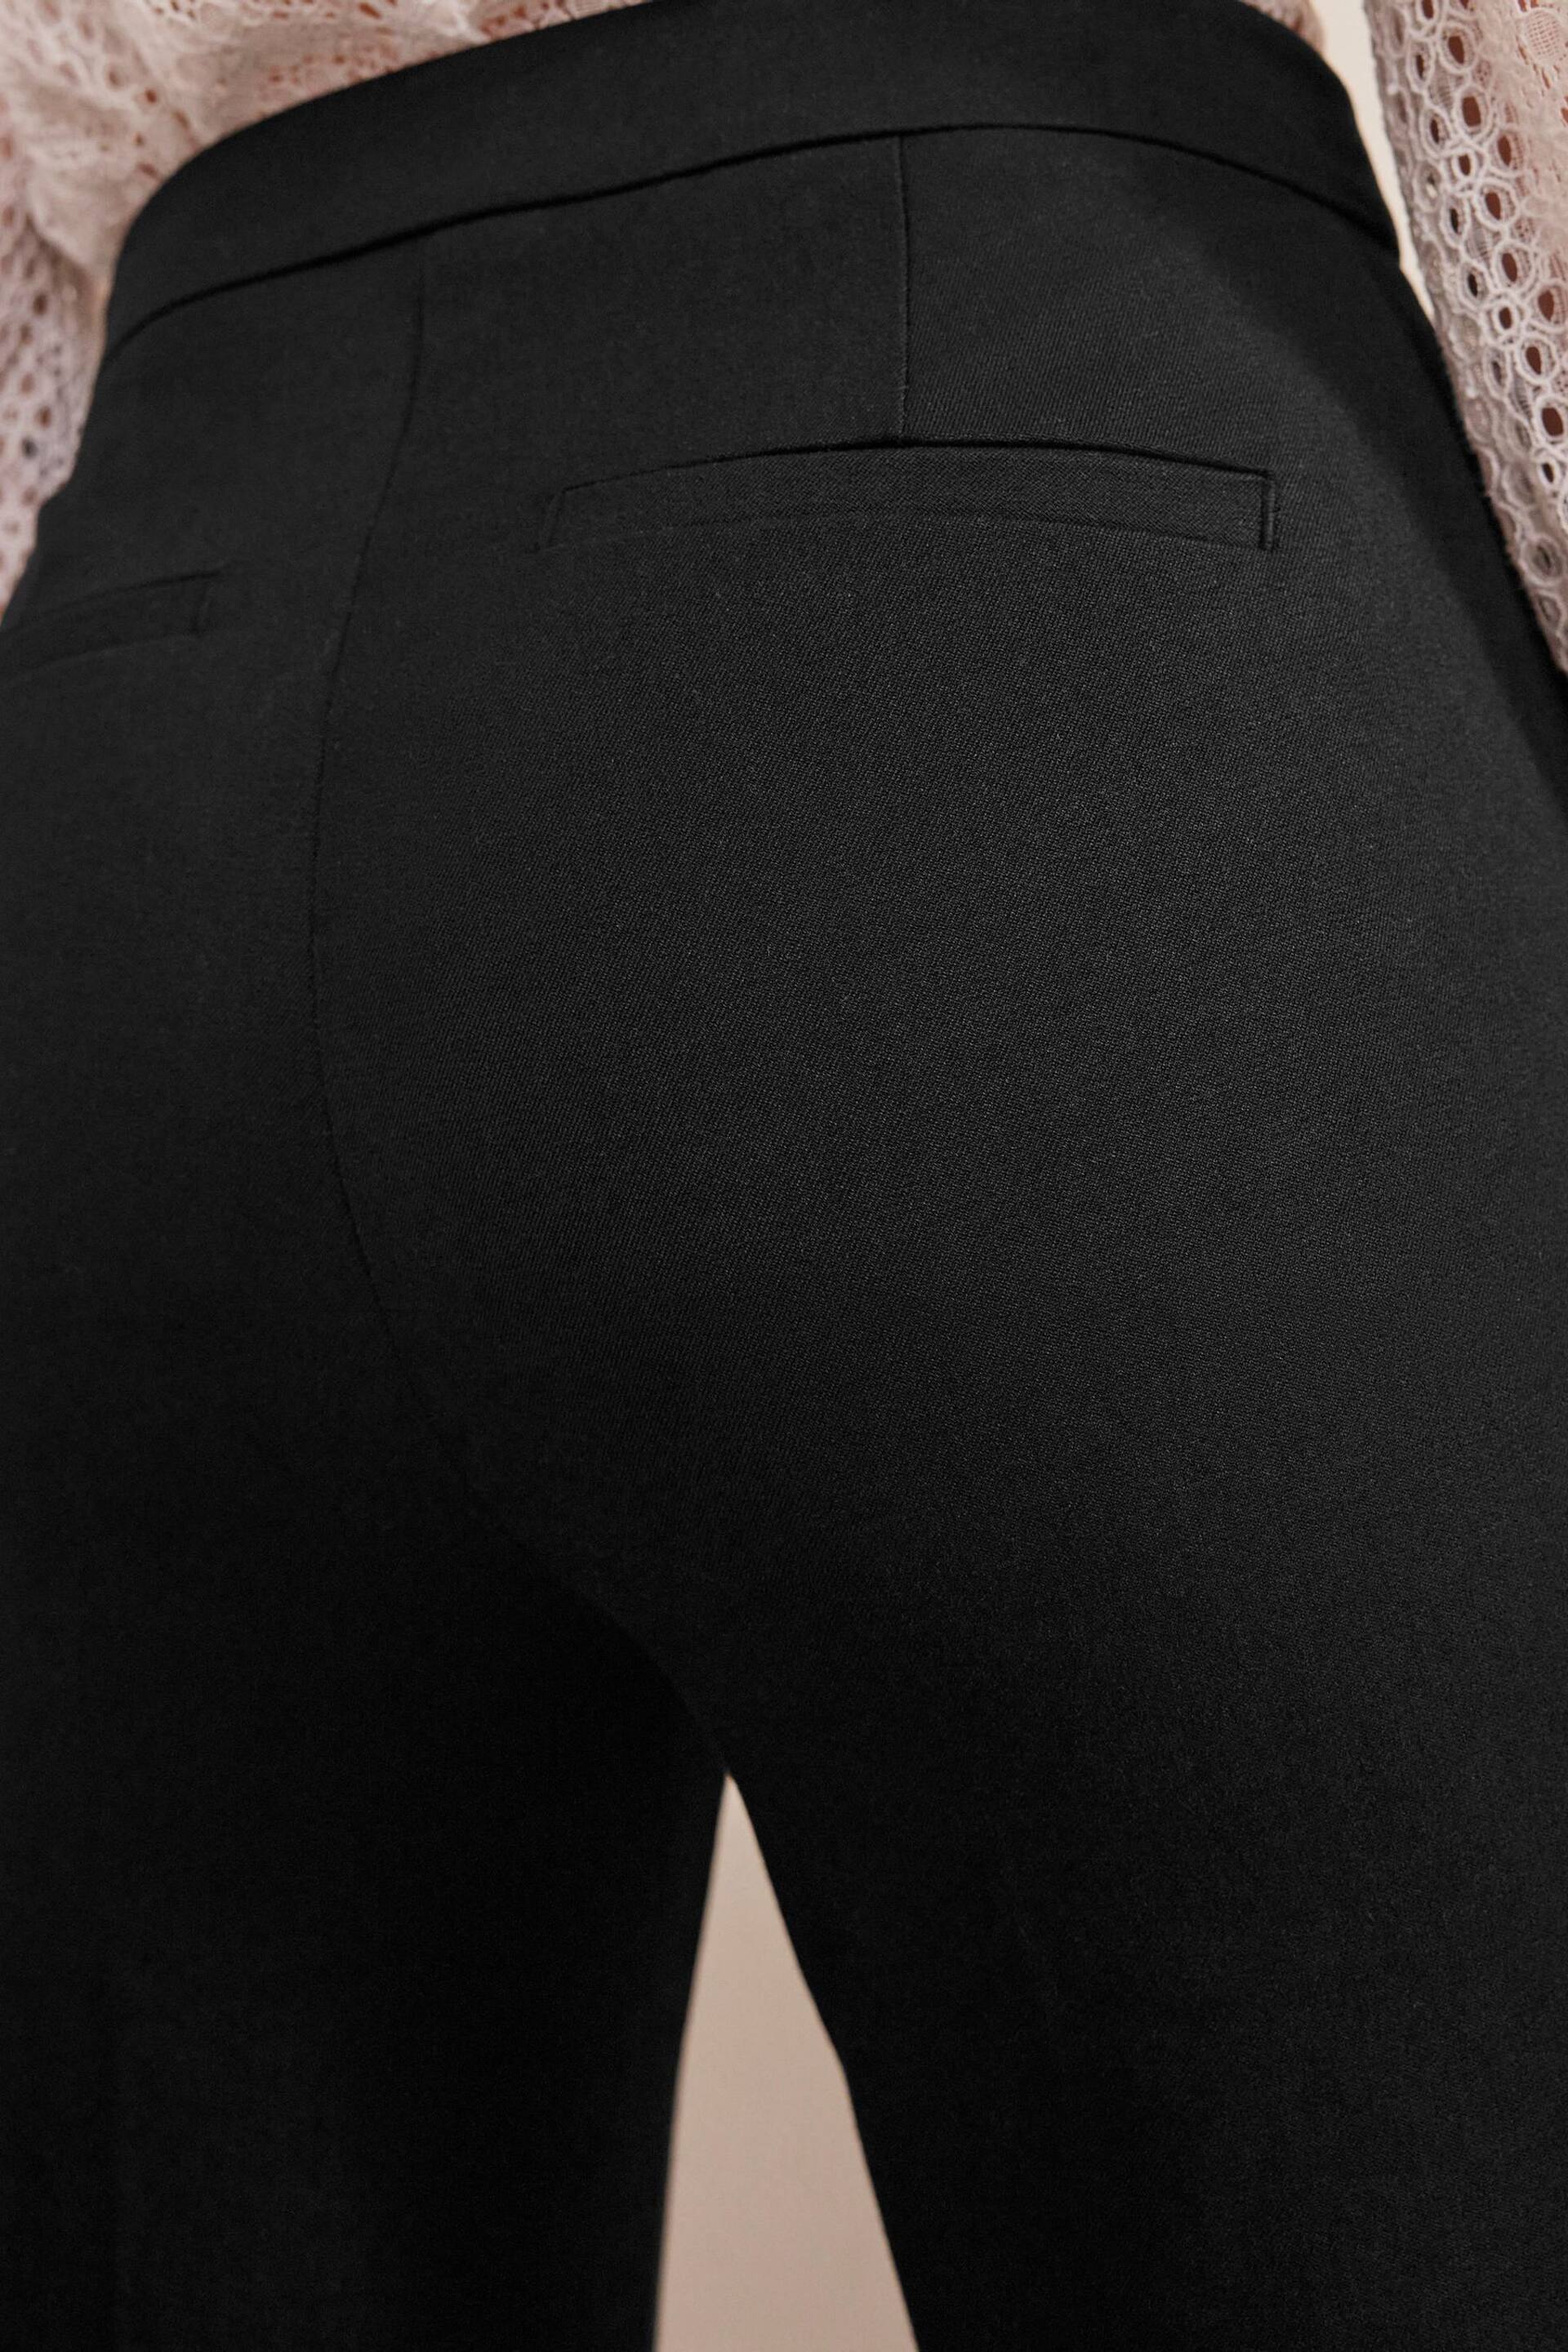 Boden Black Bi-Stretch Tapered Trousers - Image 4 of 6